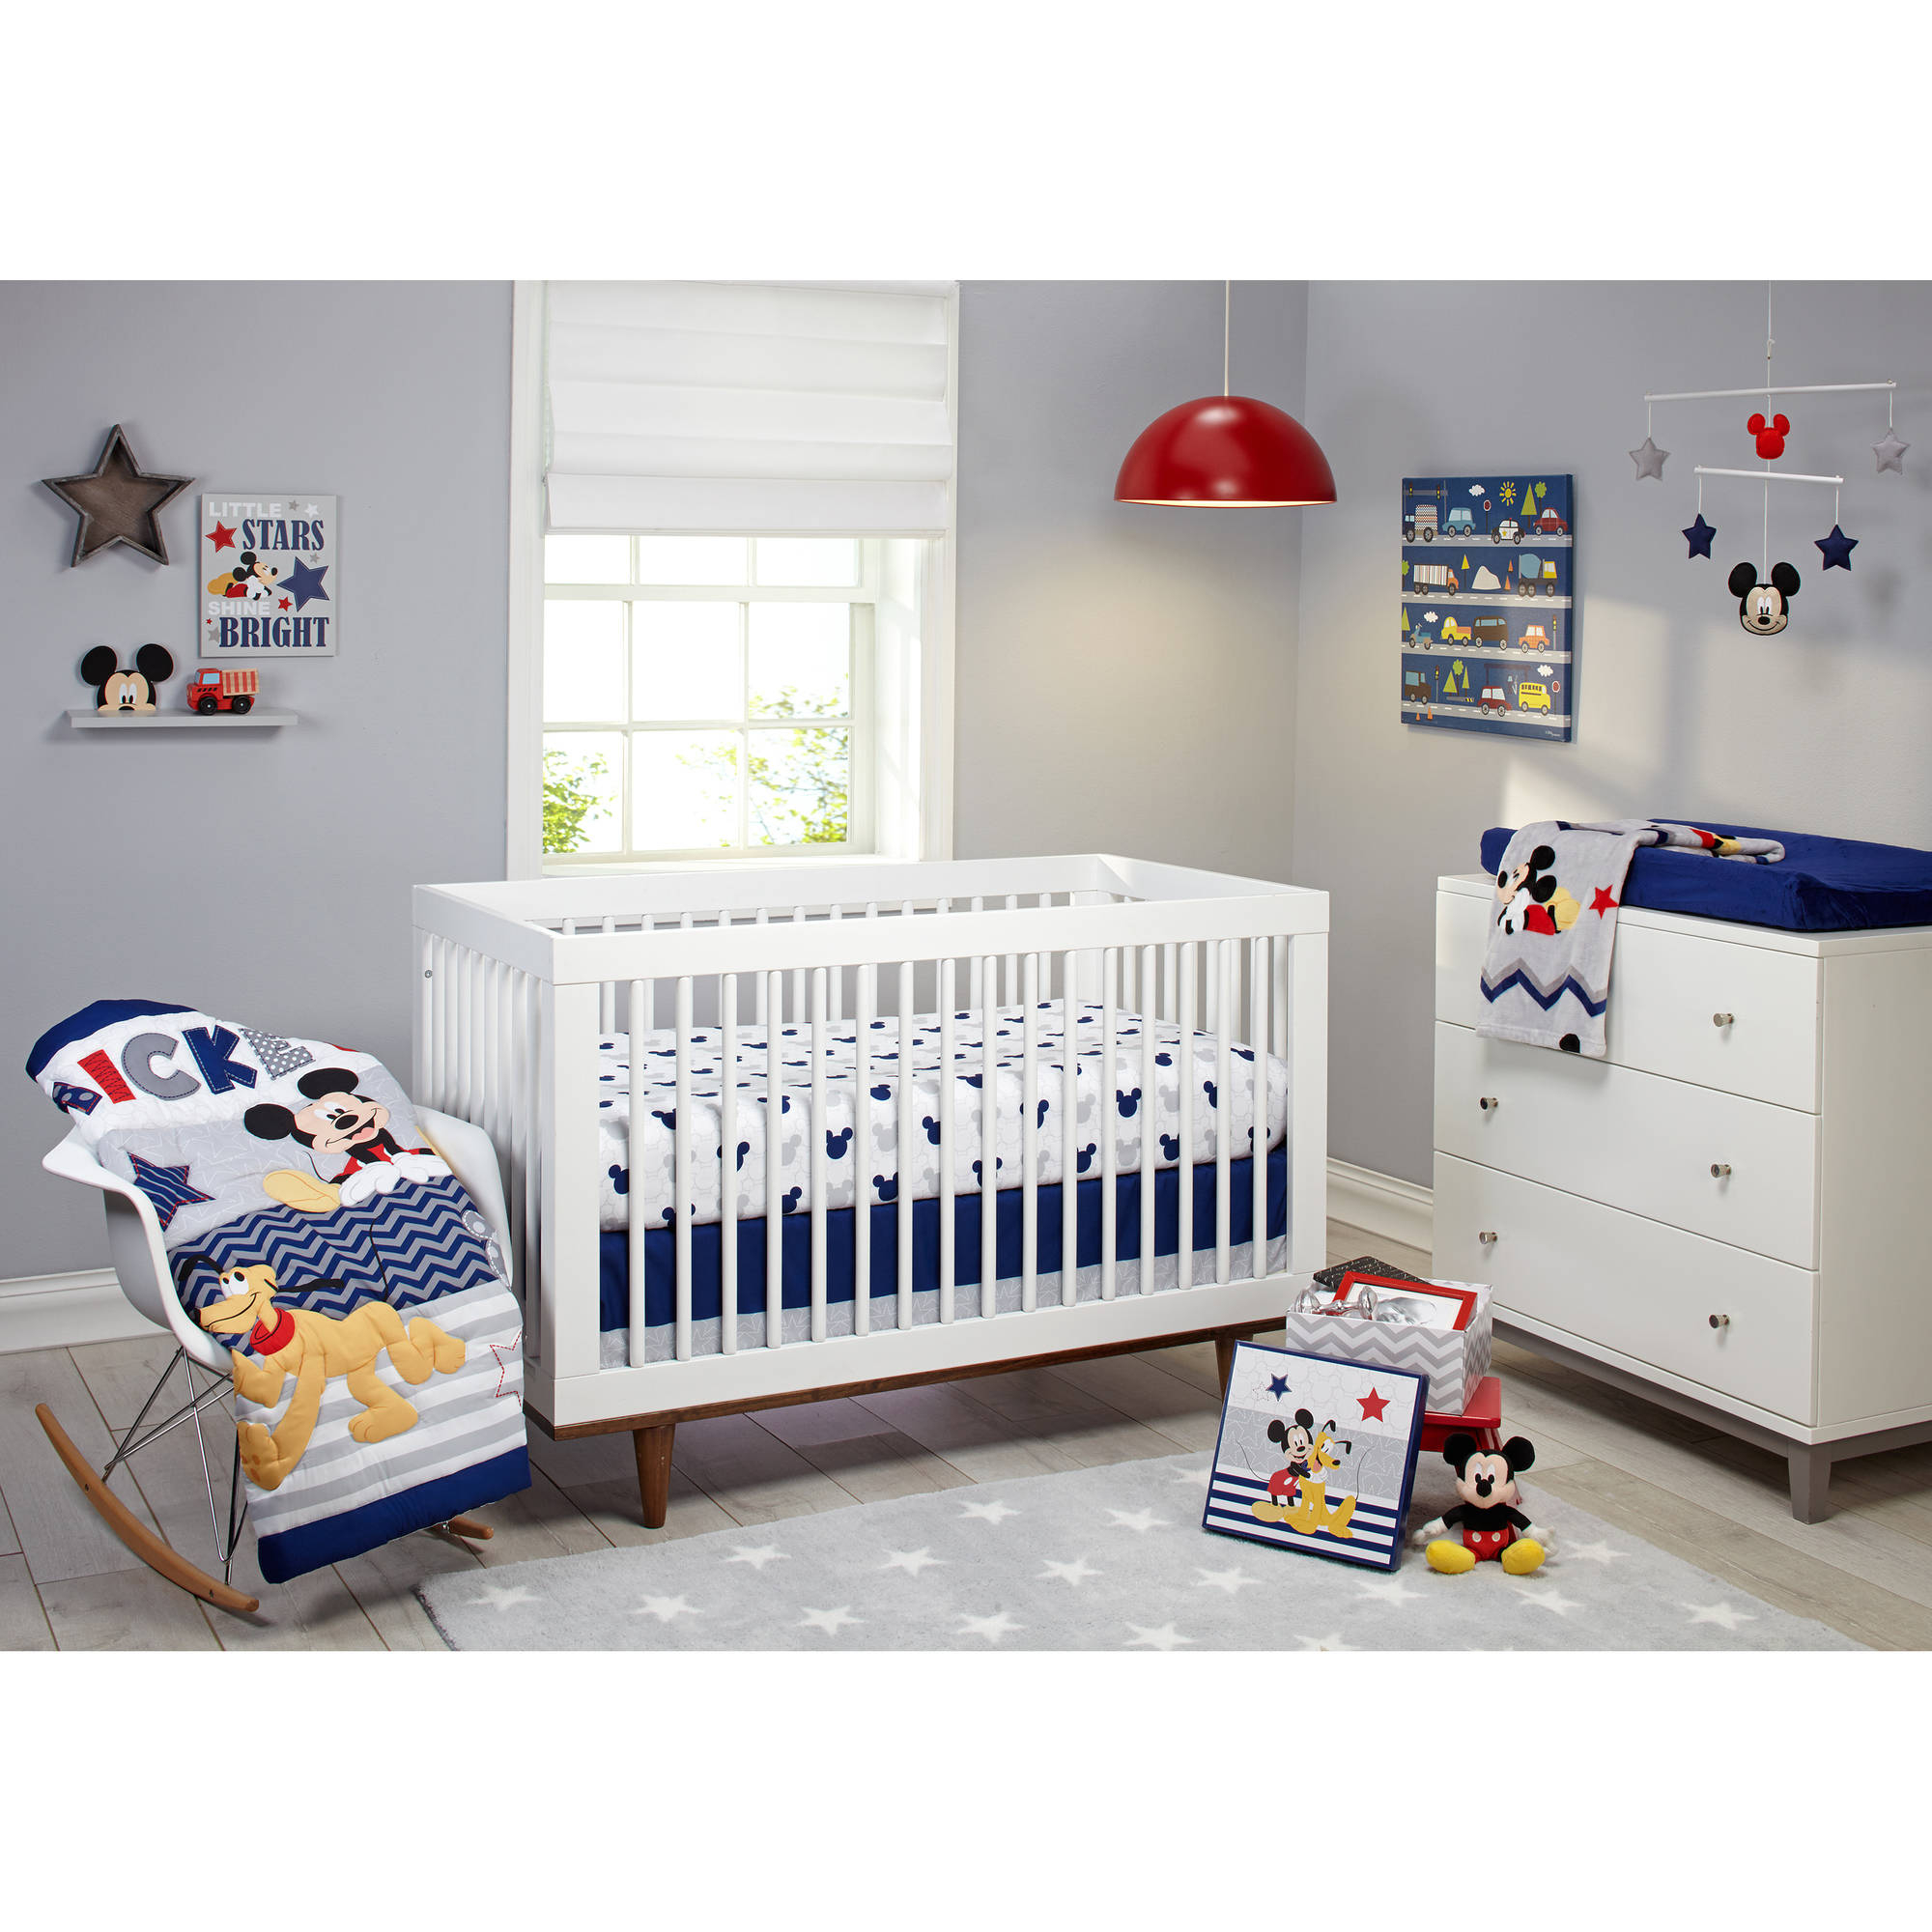 Disney Lets Go Mickey Ii 4 Piece Crib Bedding Set intended for proportions 2000 X 2000